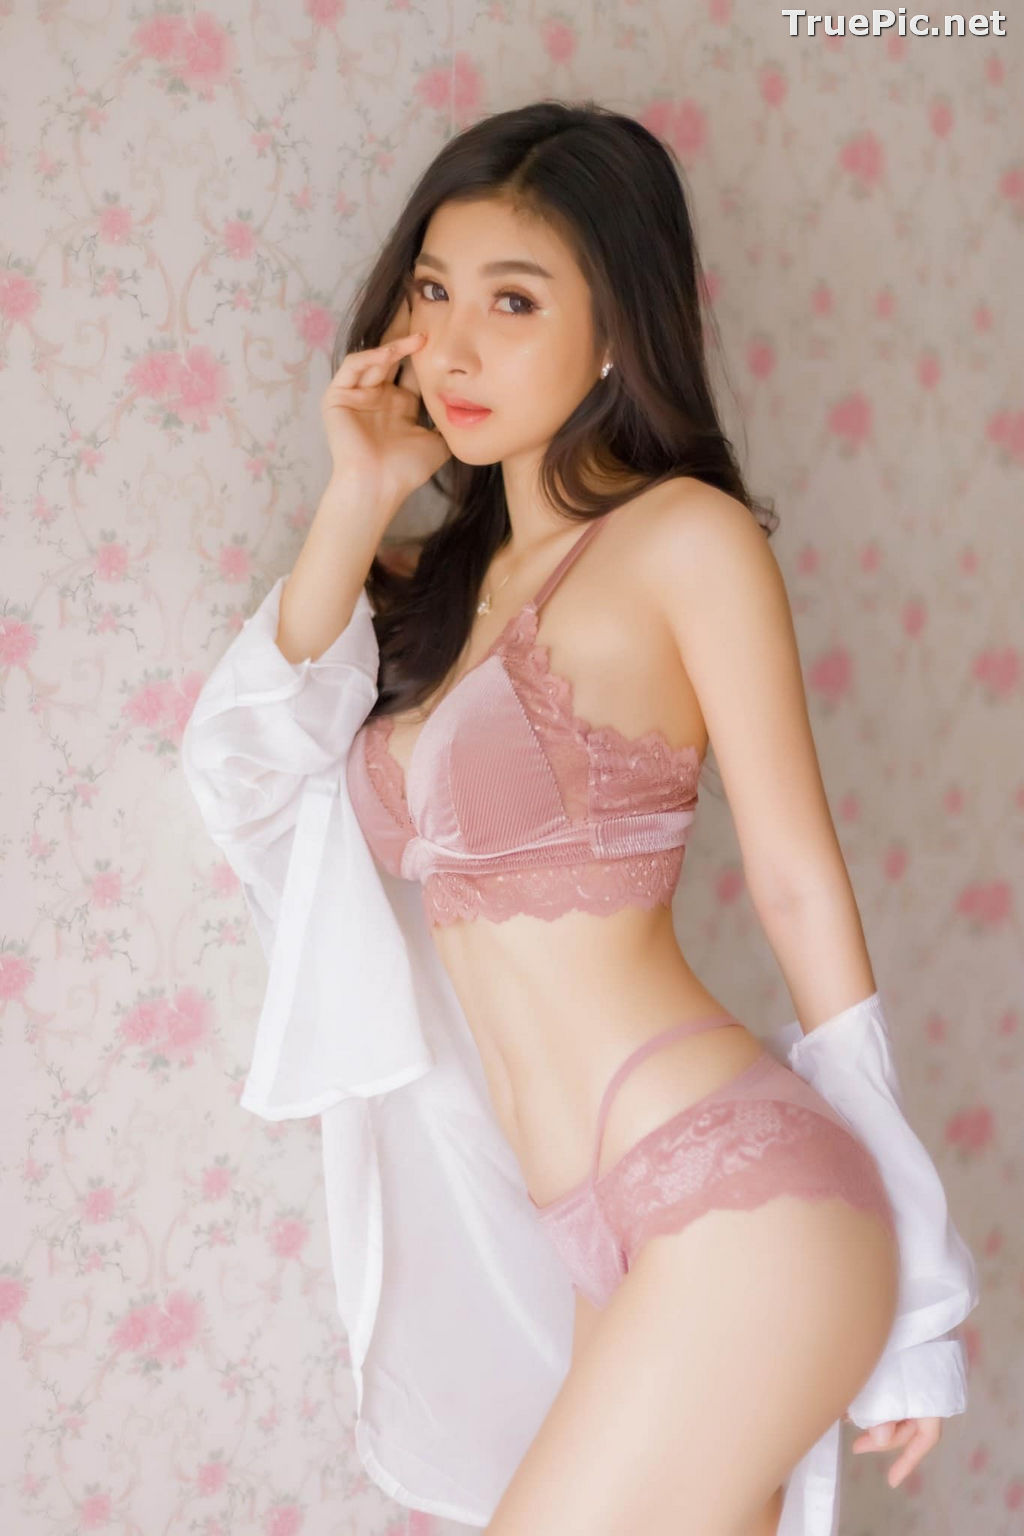 Image Thailand Sexy Model - Pattamaporn Keawkum - Pink and Red Lingerie - TruePic.net - Picture-7